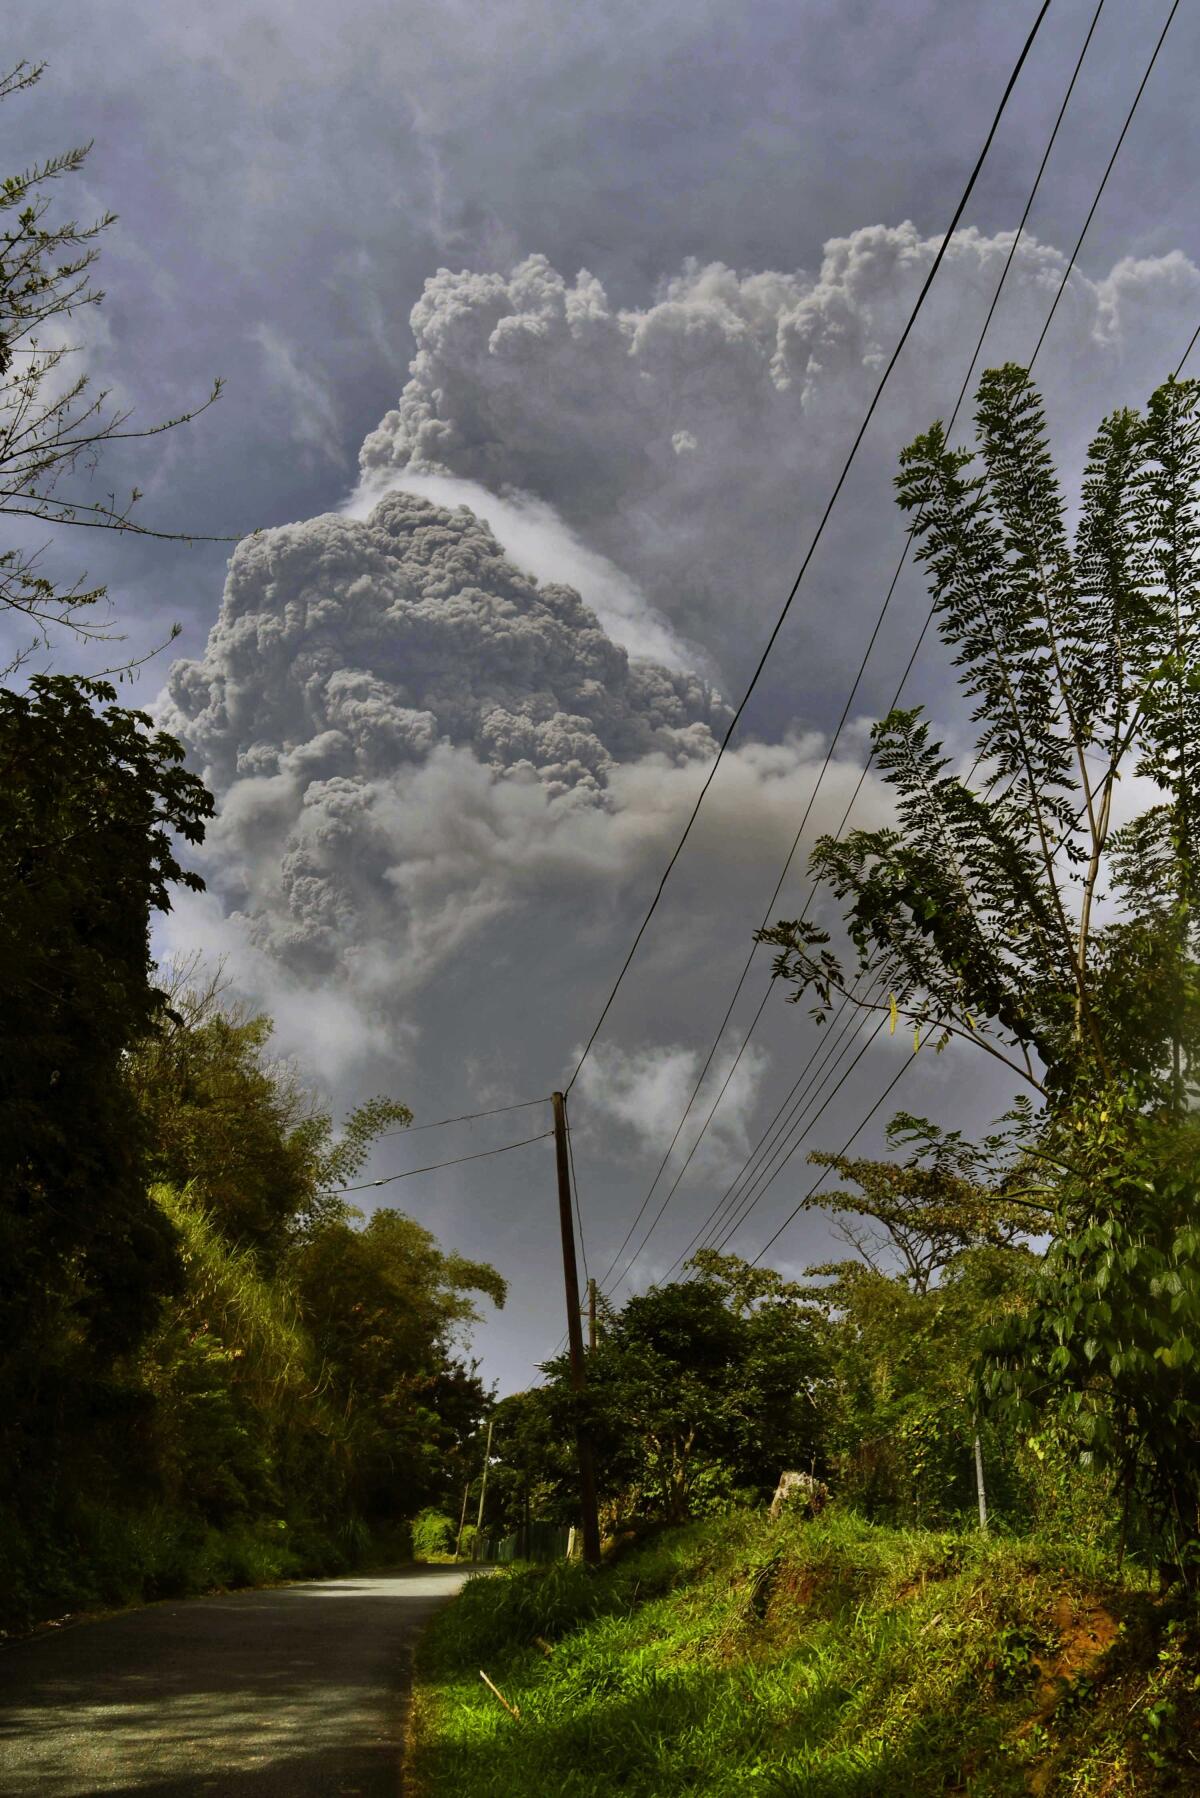 Plumes of ash rise from the La Soufriere volcano